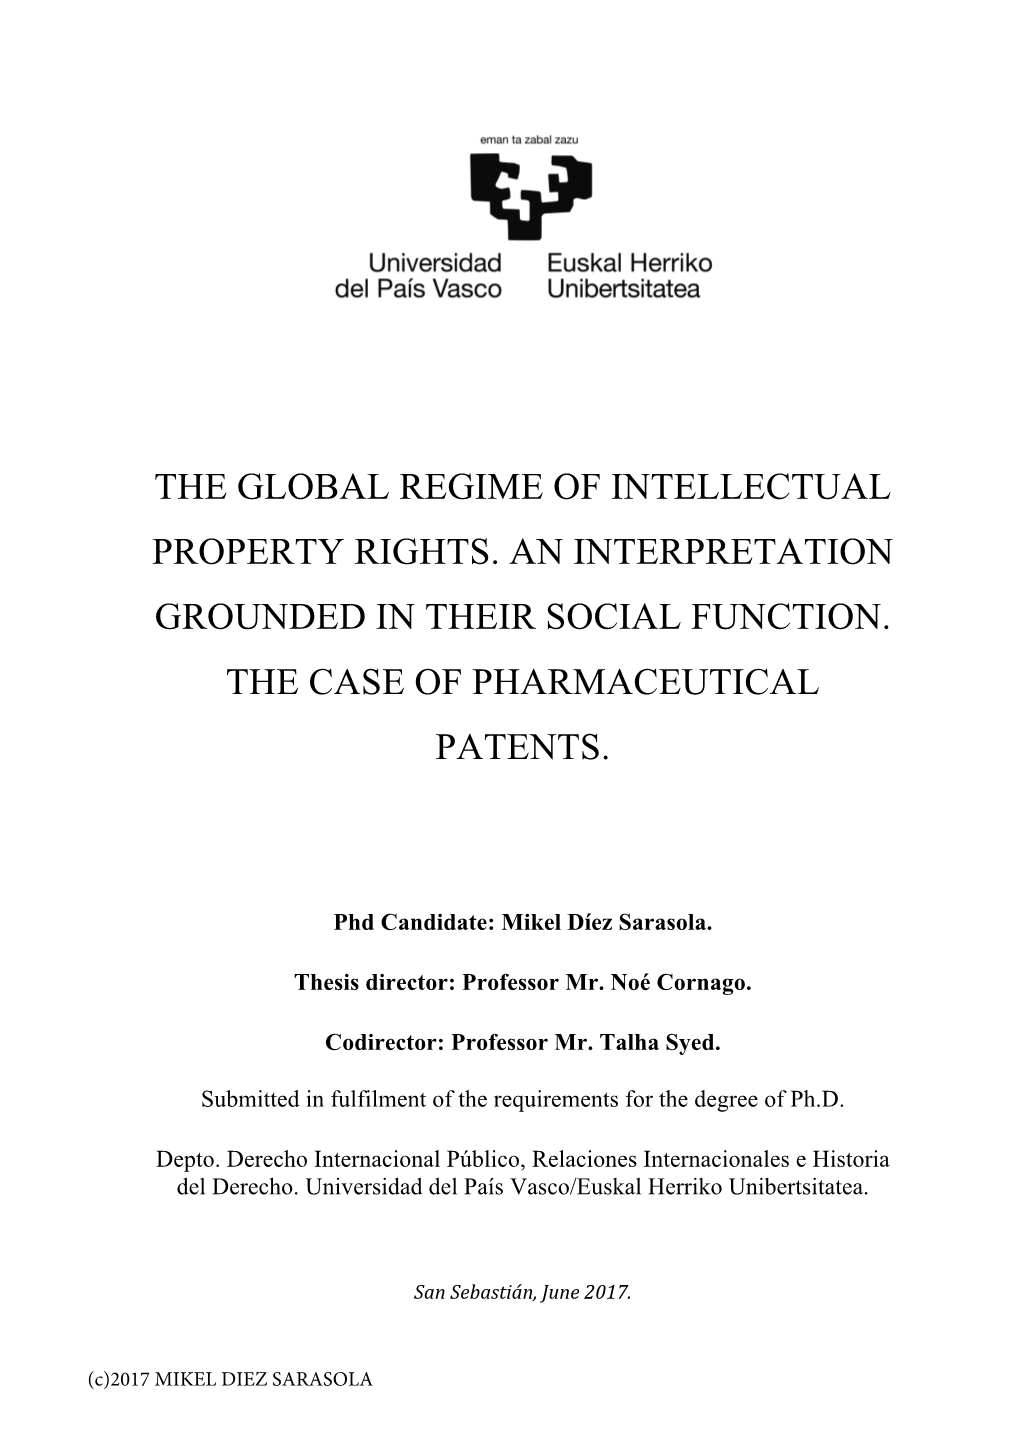 The Global Regime of Intellectual Property Rights